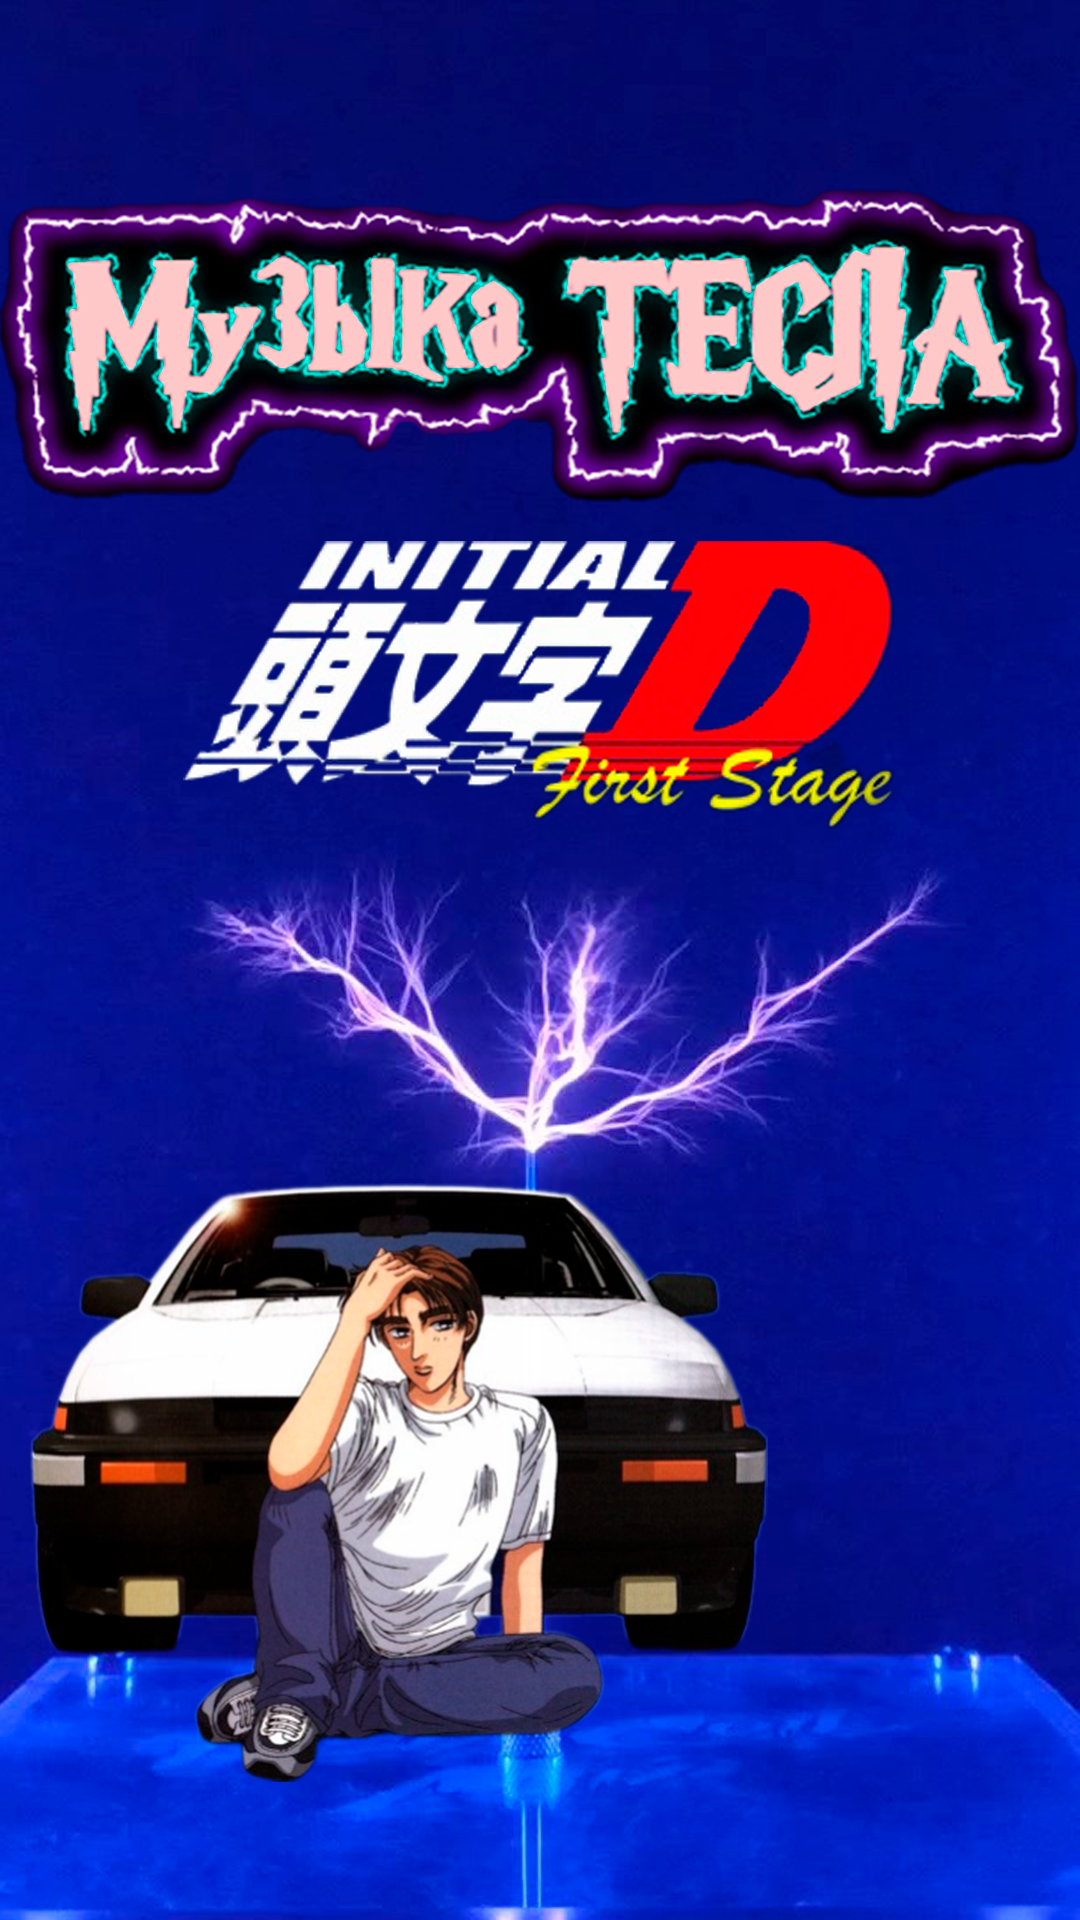 Running In The 90's - Initial D First Stage Tesla Coil Mix #музыкатесла